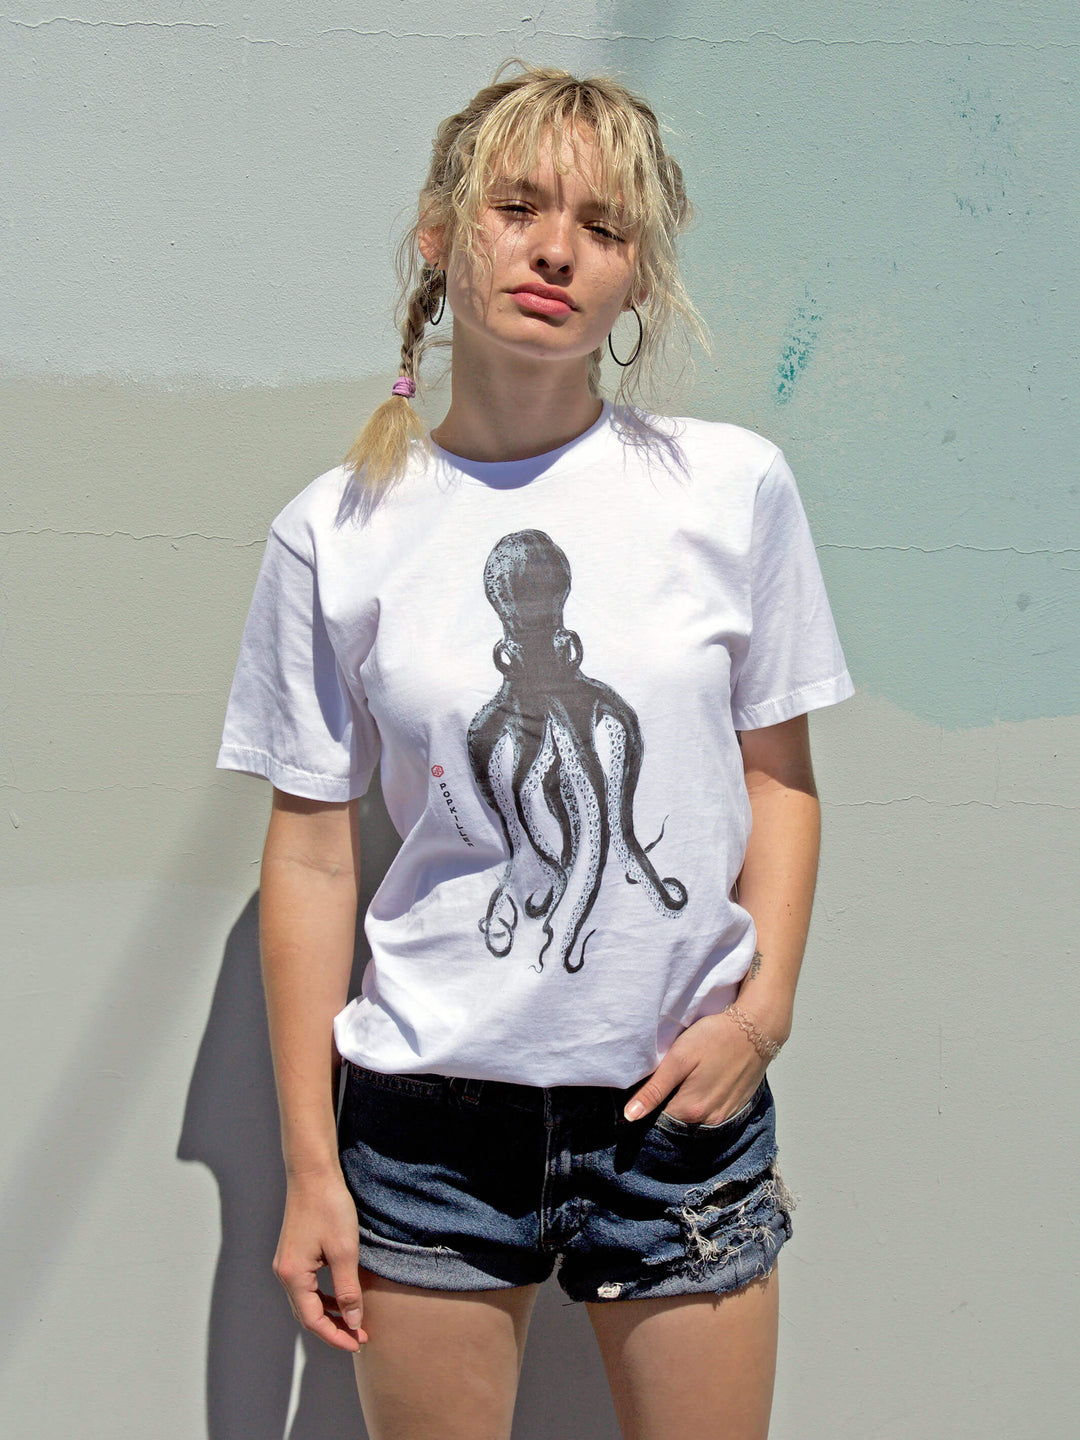 White octopus graphic tee by Los Angeles brand Popkiller.